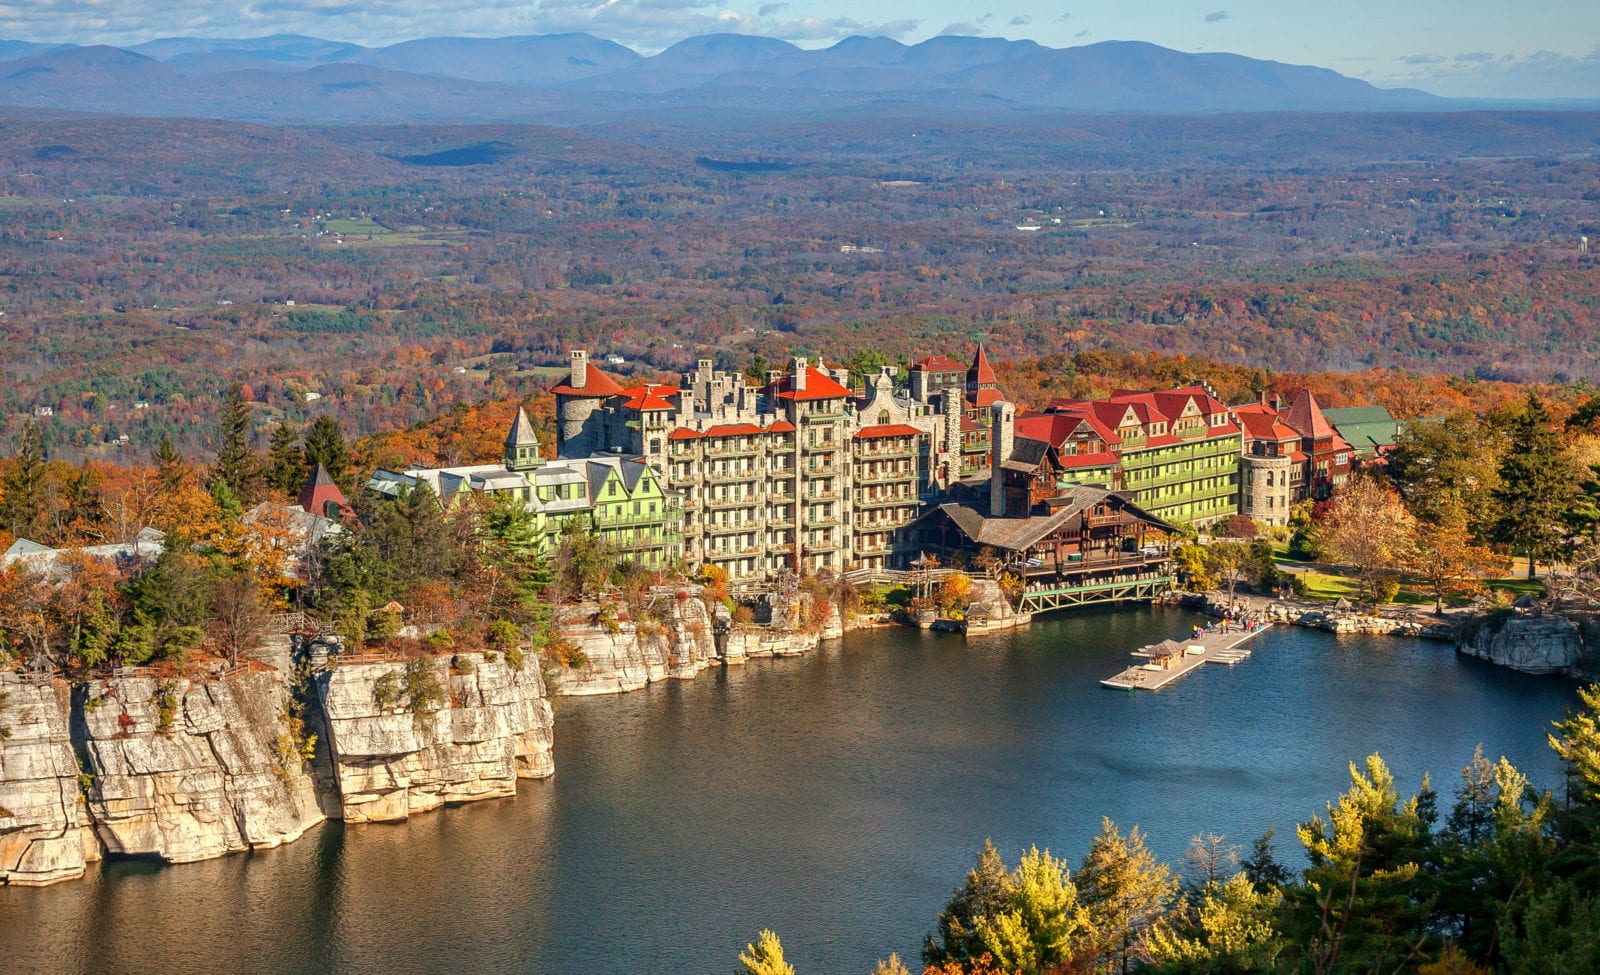 Mohonk Mountain House in the Hudson River Valley of New York (Photo: Mohonk Mountain House)